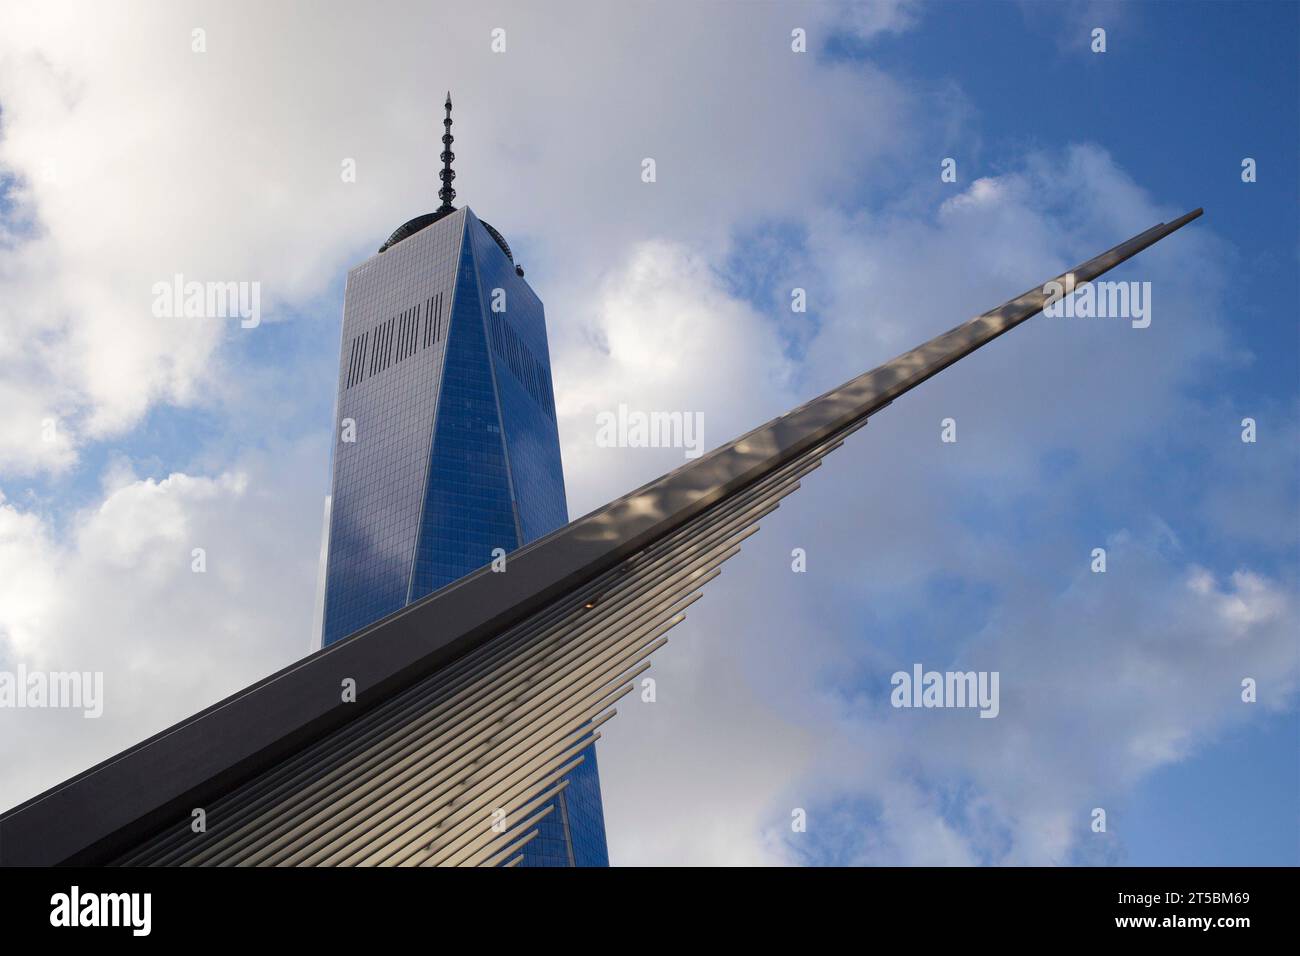 A stunning stock photo of One World Trade Center, the tallest building in the Western Hemisphere. The photo captures the iconic skyscraper's soaring h Stock Photo